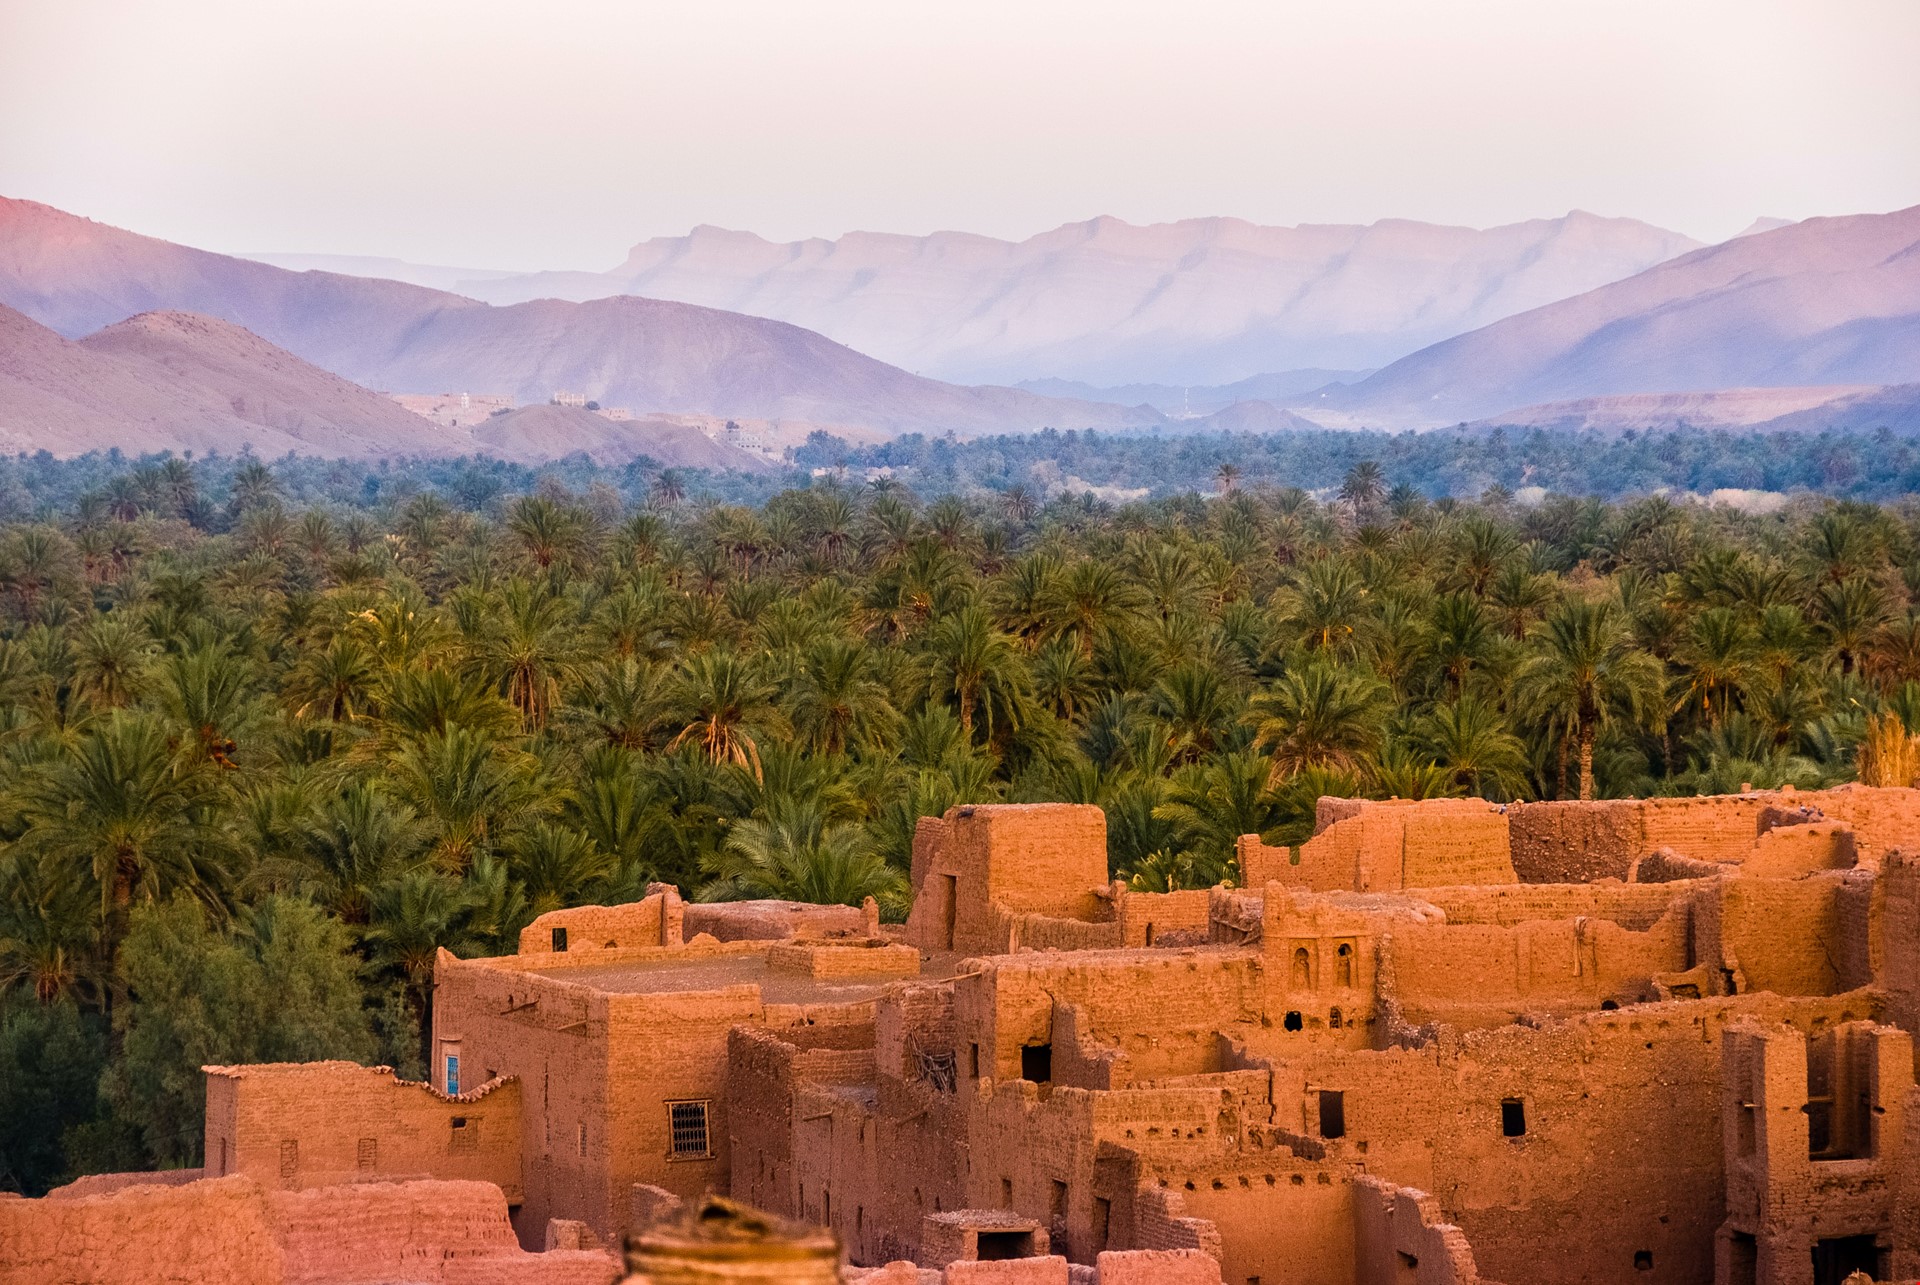 Digital Nomads accommodation in Morocco)